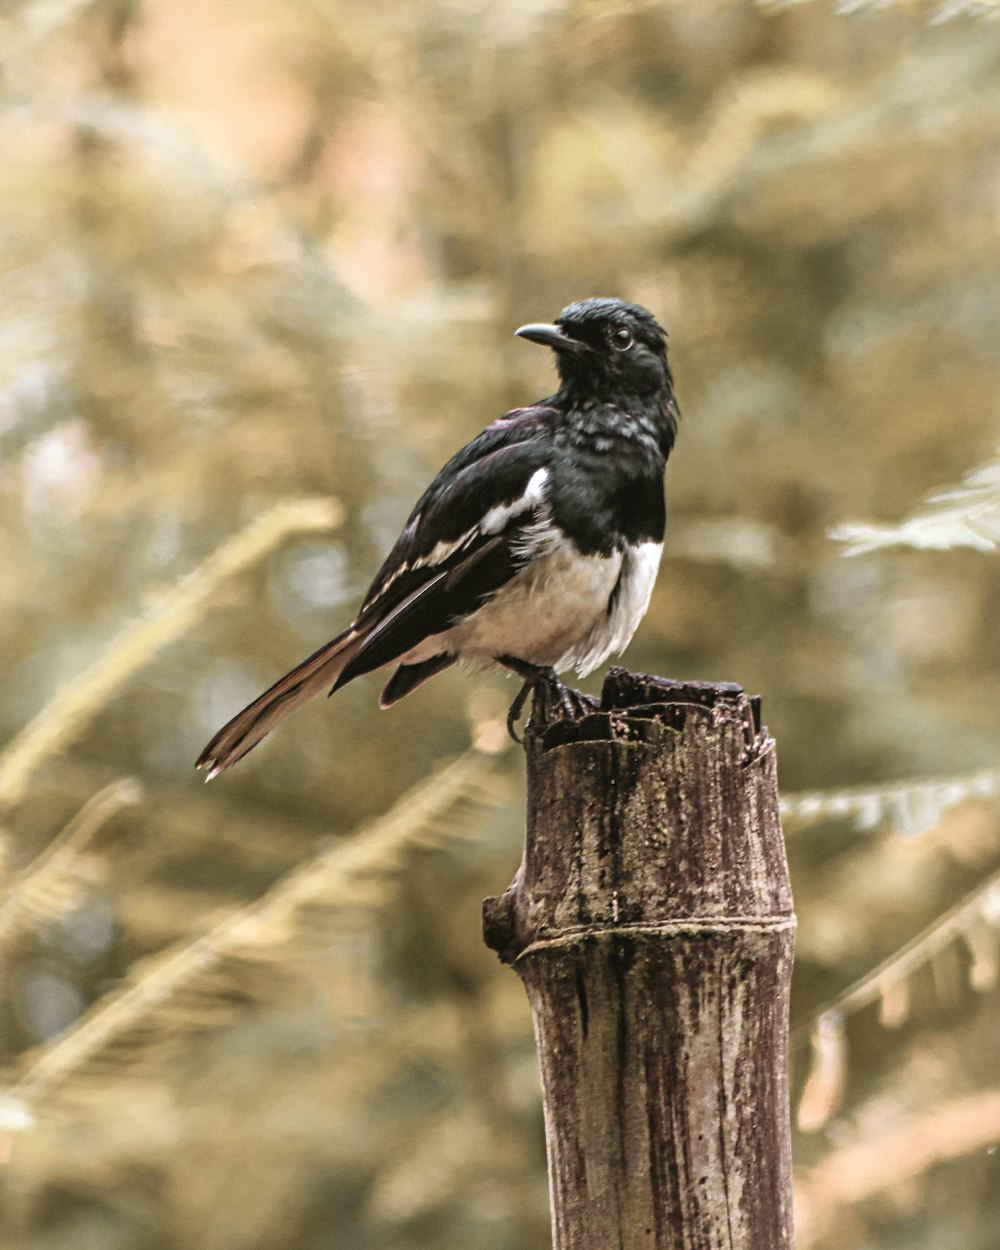 black and white bird on brown wooden fence during daytime